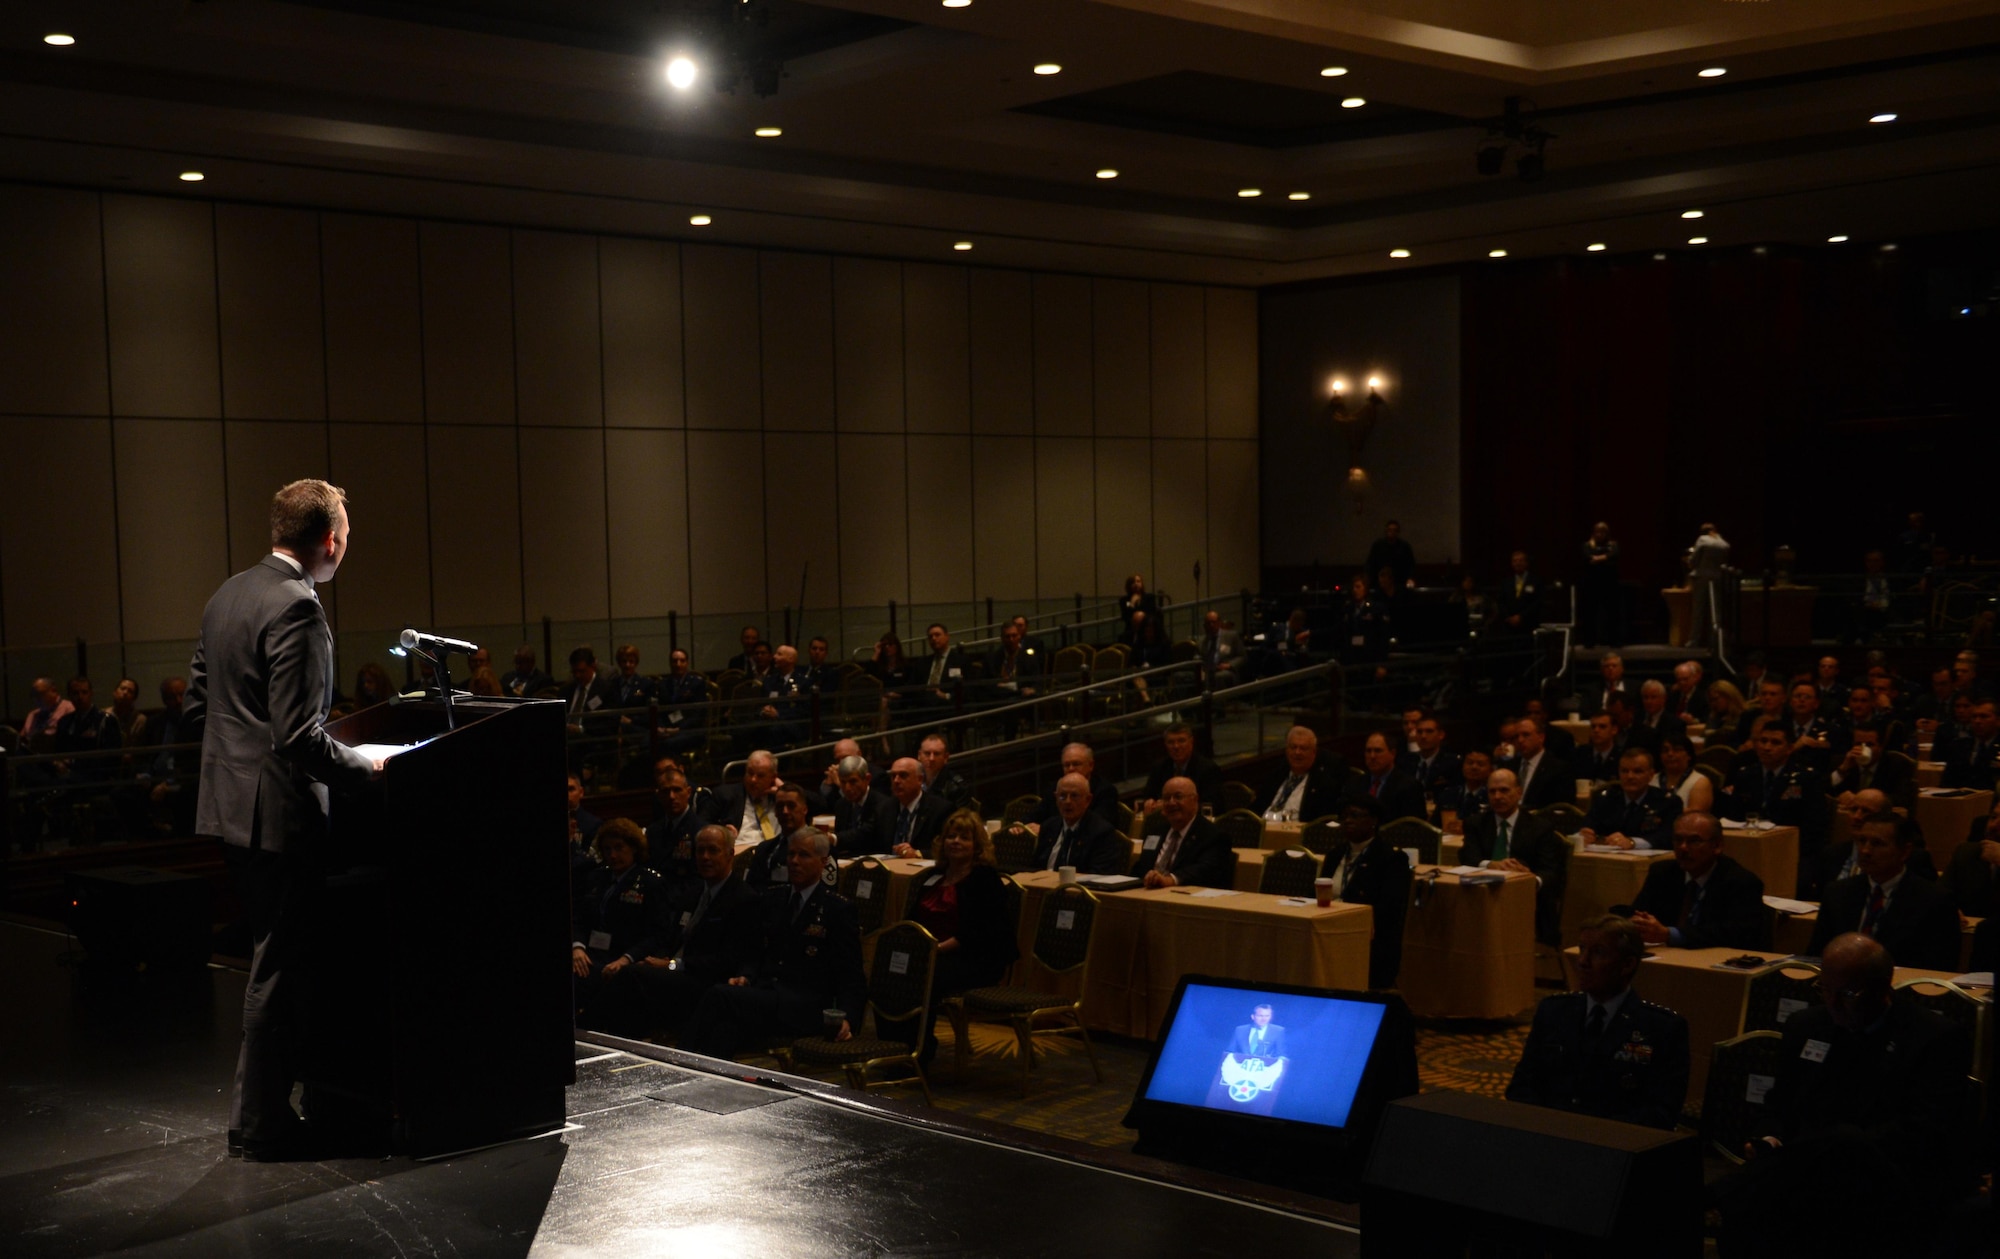 Acting Secretary of the Air Force Eric Fanning, addresses members of the Air Force Association Nov 22, 2013, during the AFA Pacific Air & Space Symposium, Los Angeles, Cali. Fanning spoke on the state of the force and the Air Force’s position in space and cyberspace. 